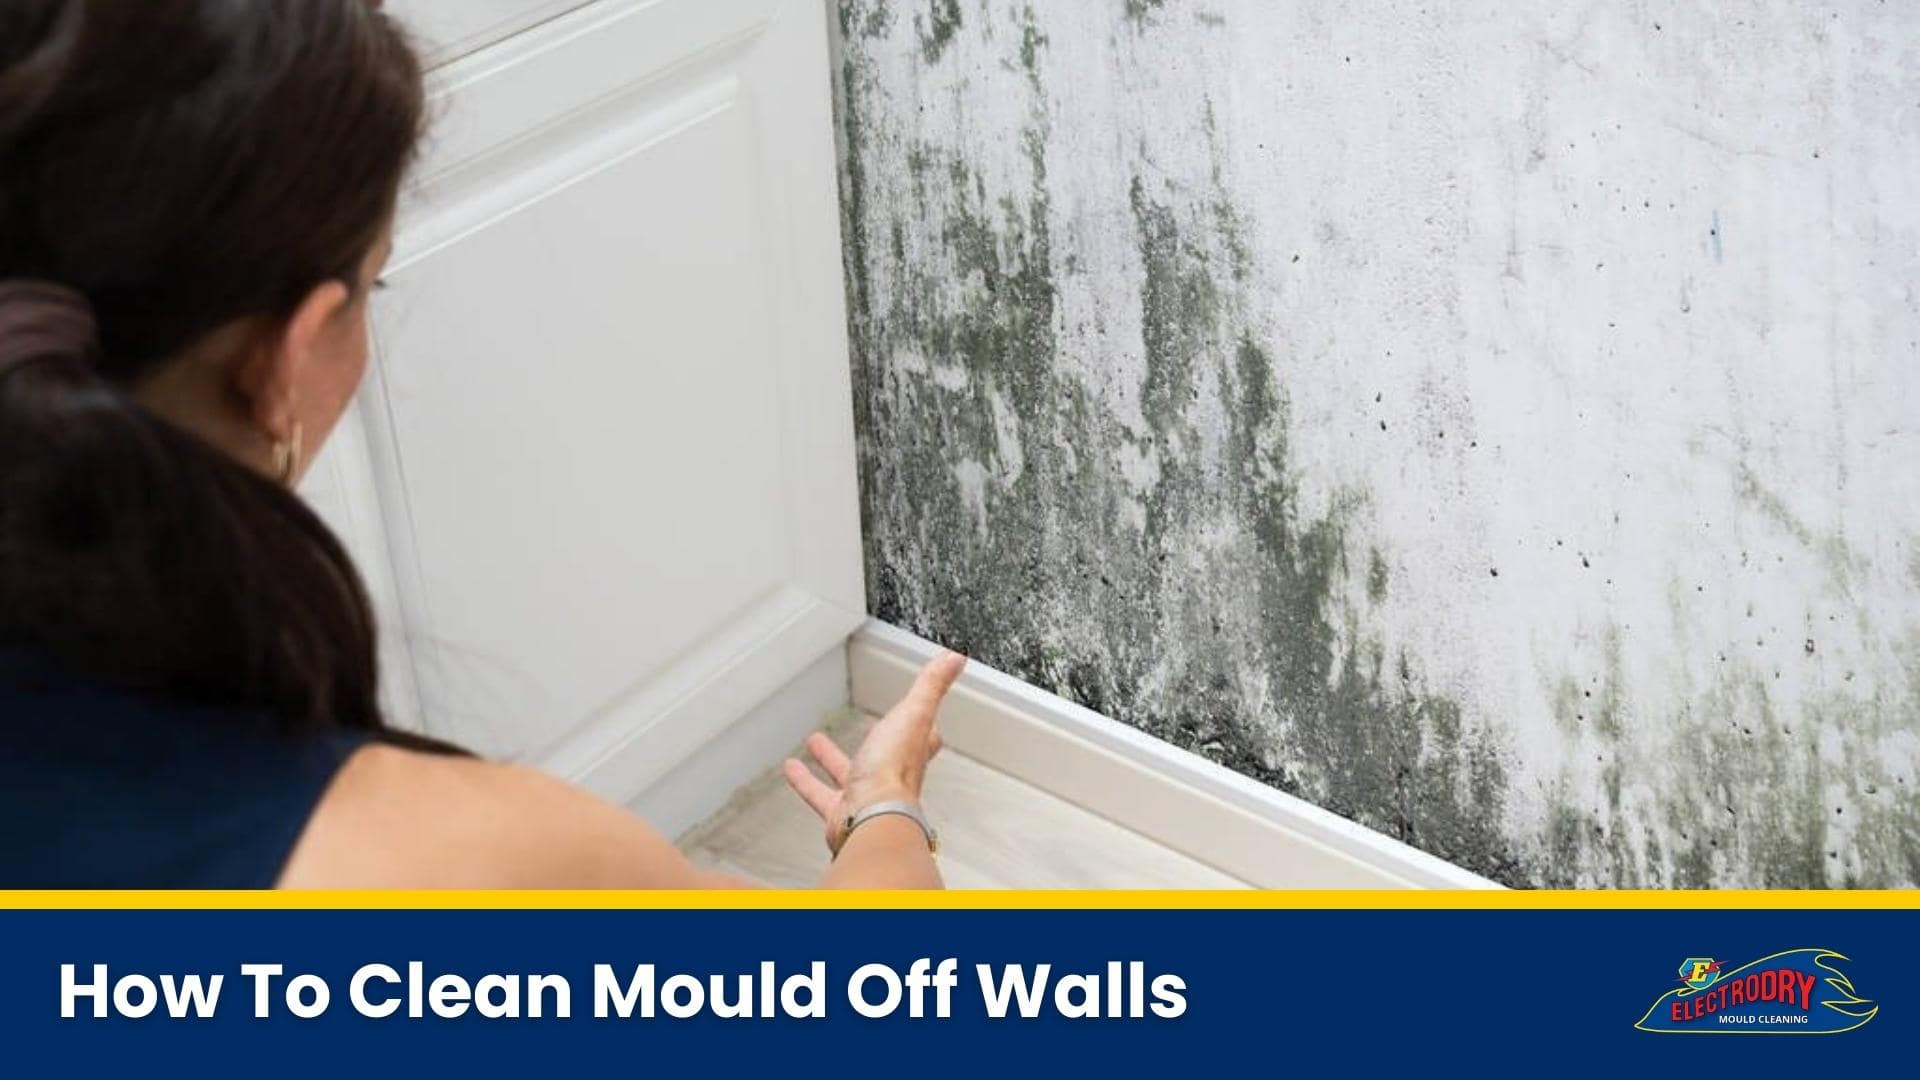 How To Clean Mould Off Walls